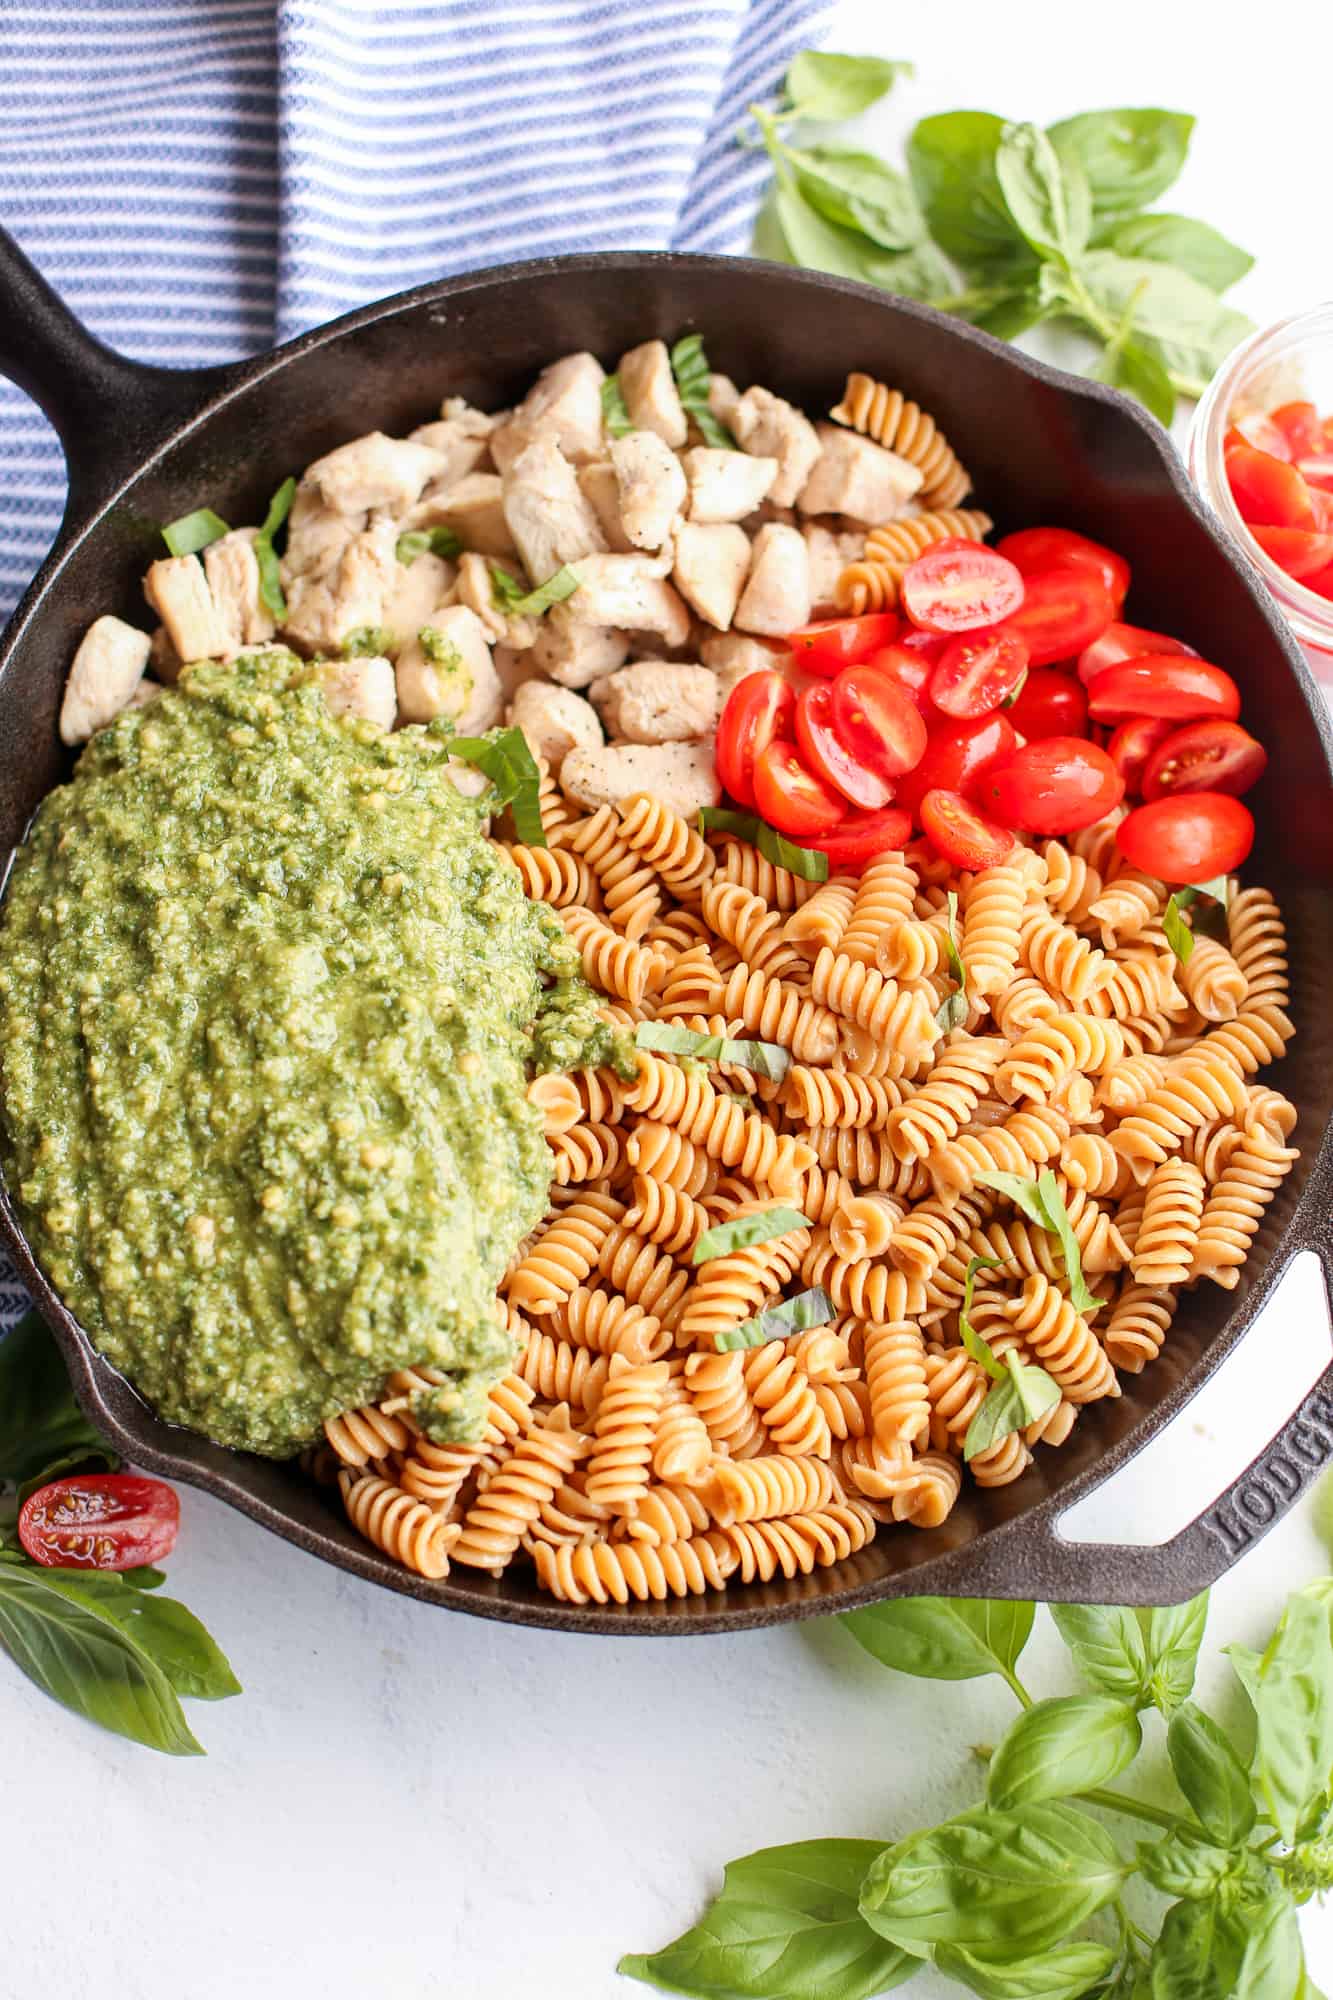 Ingredients of chicken pesto pasta piled up in a skillet.